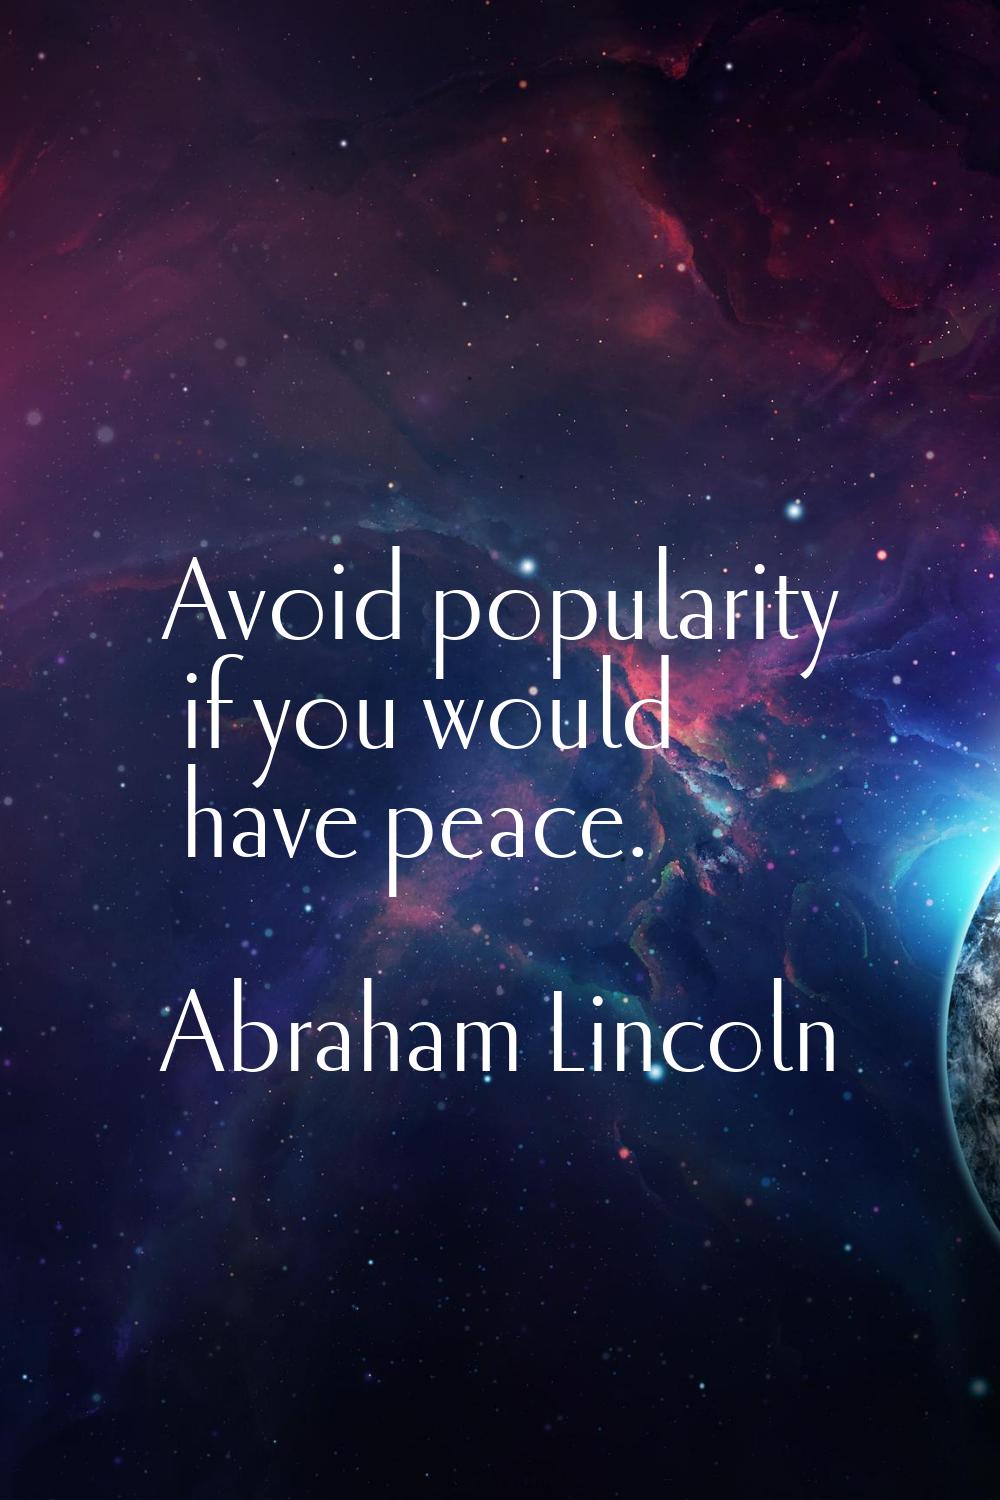 Avoid popularity if you would have peace.